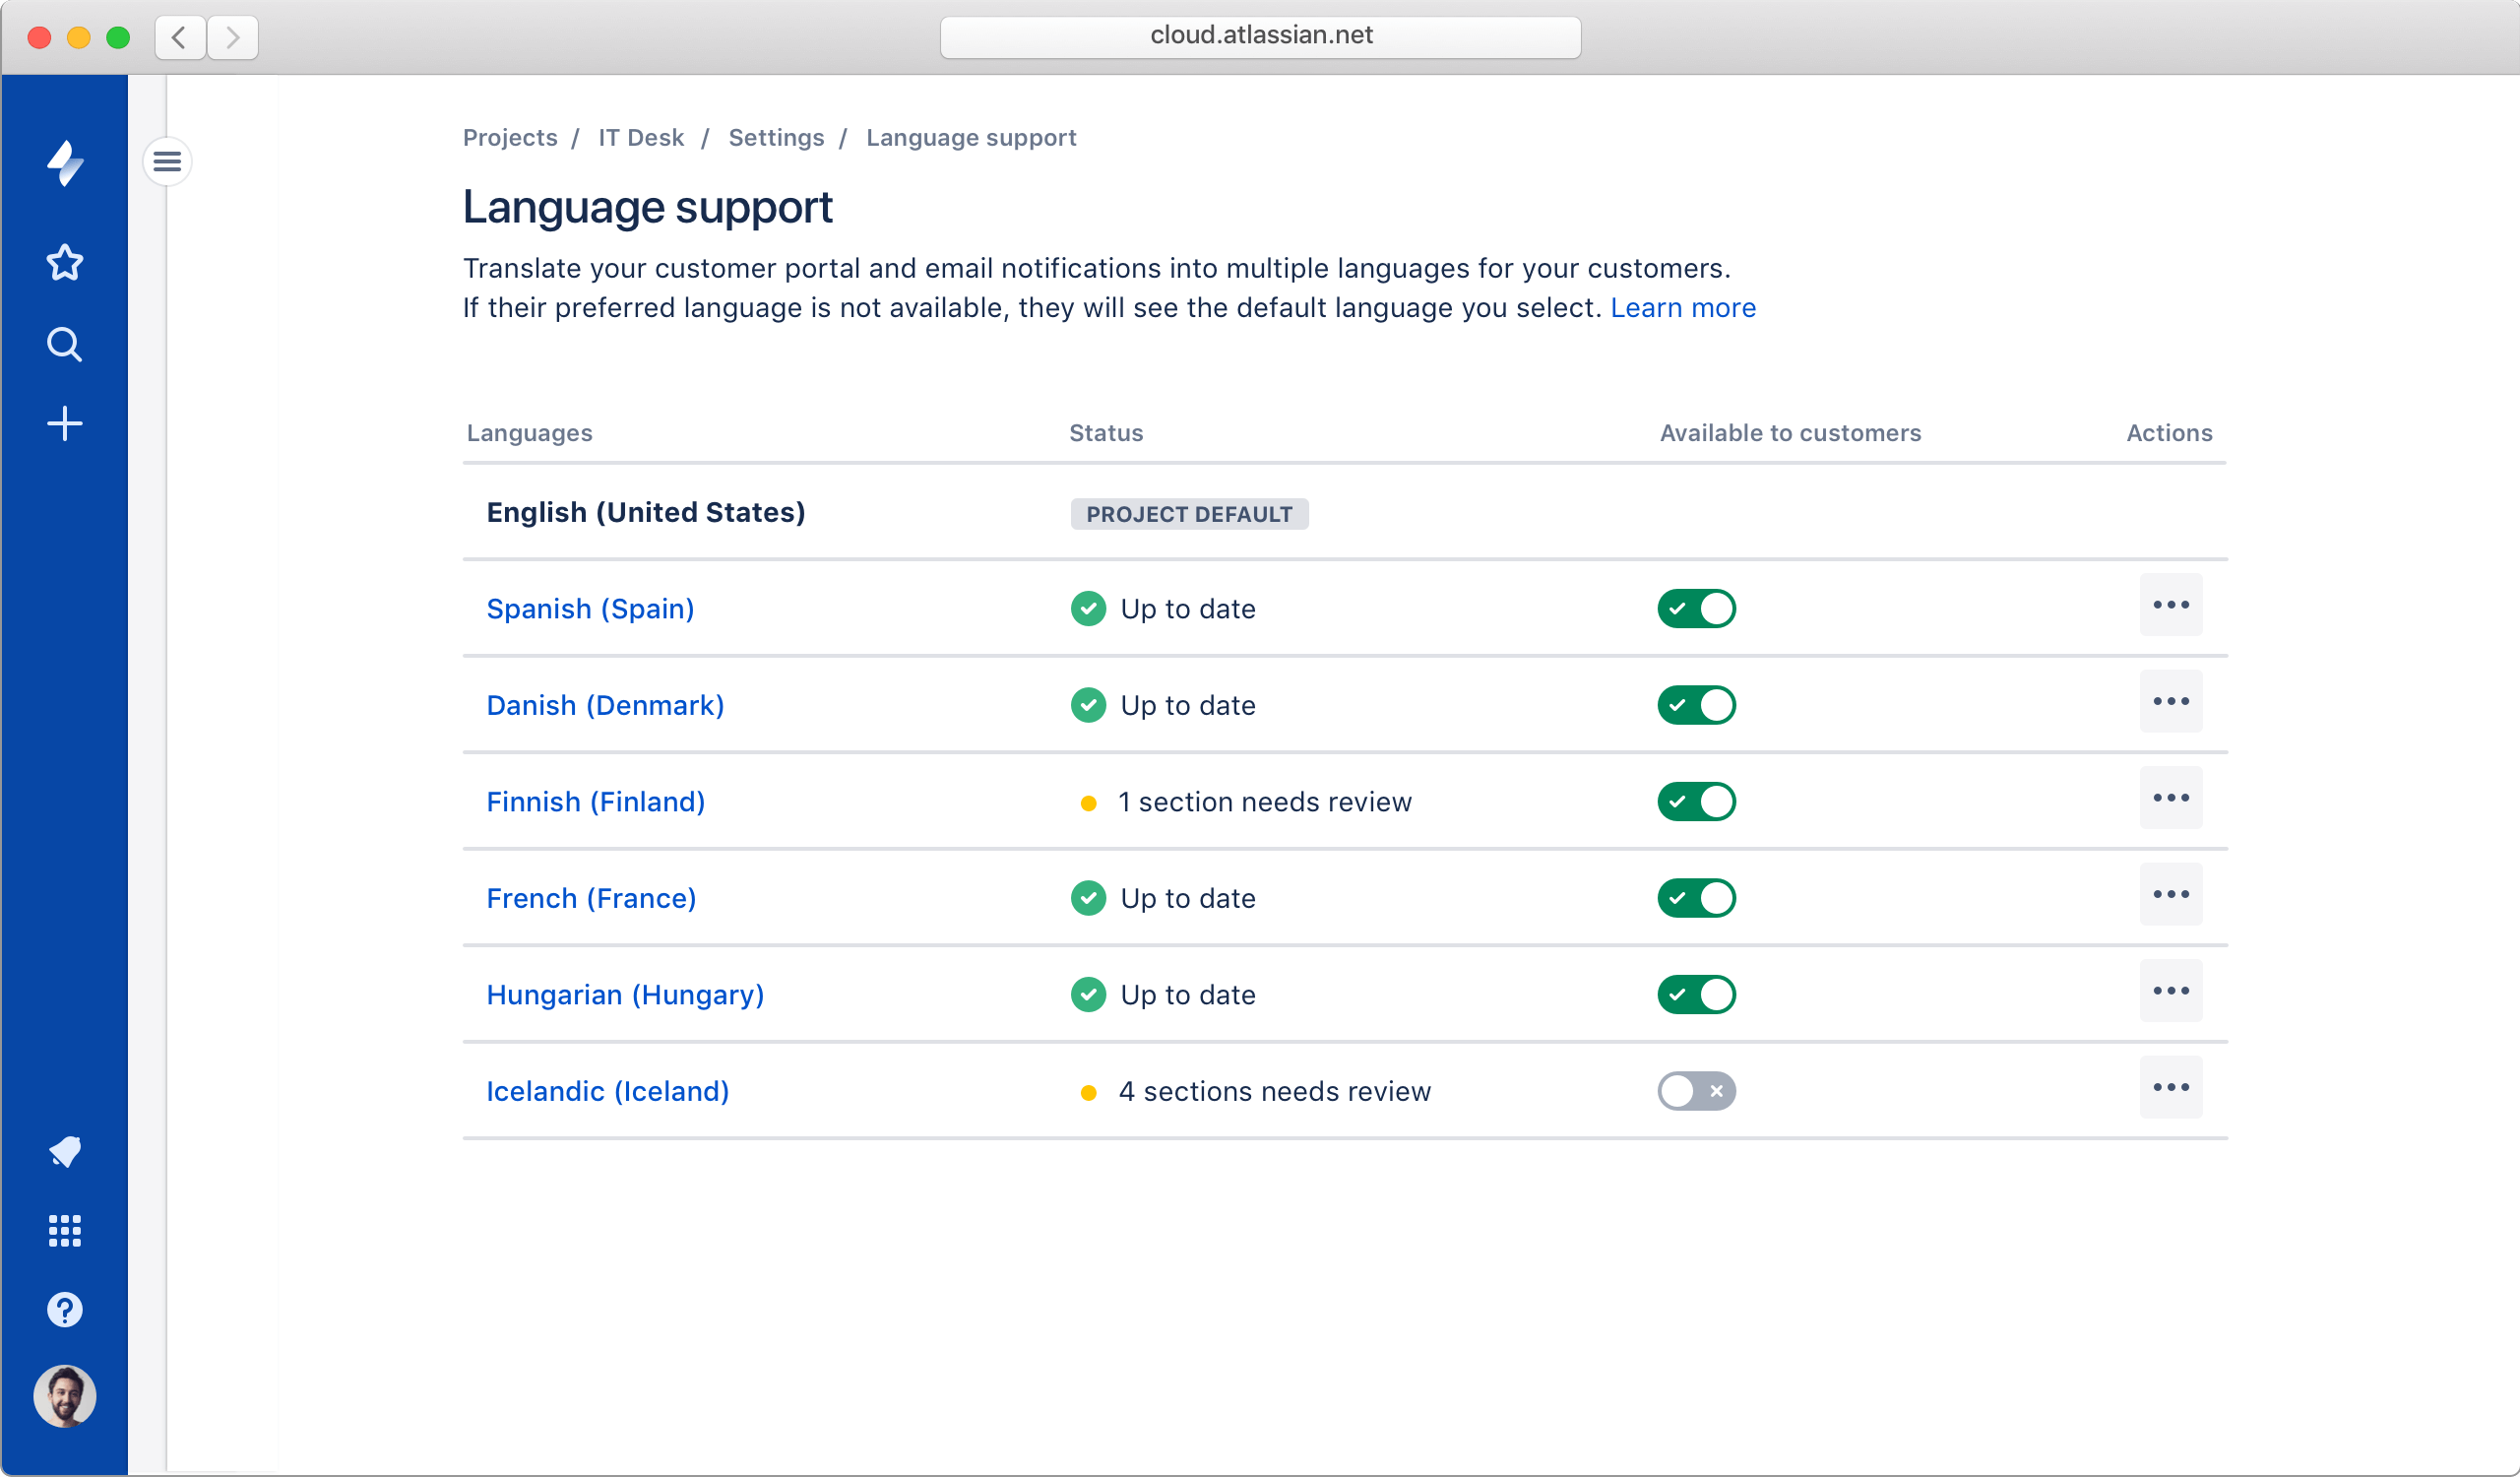 Example of multi-language support options